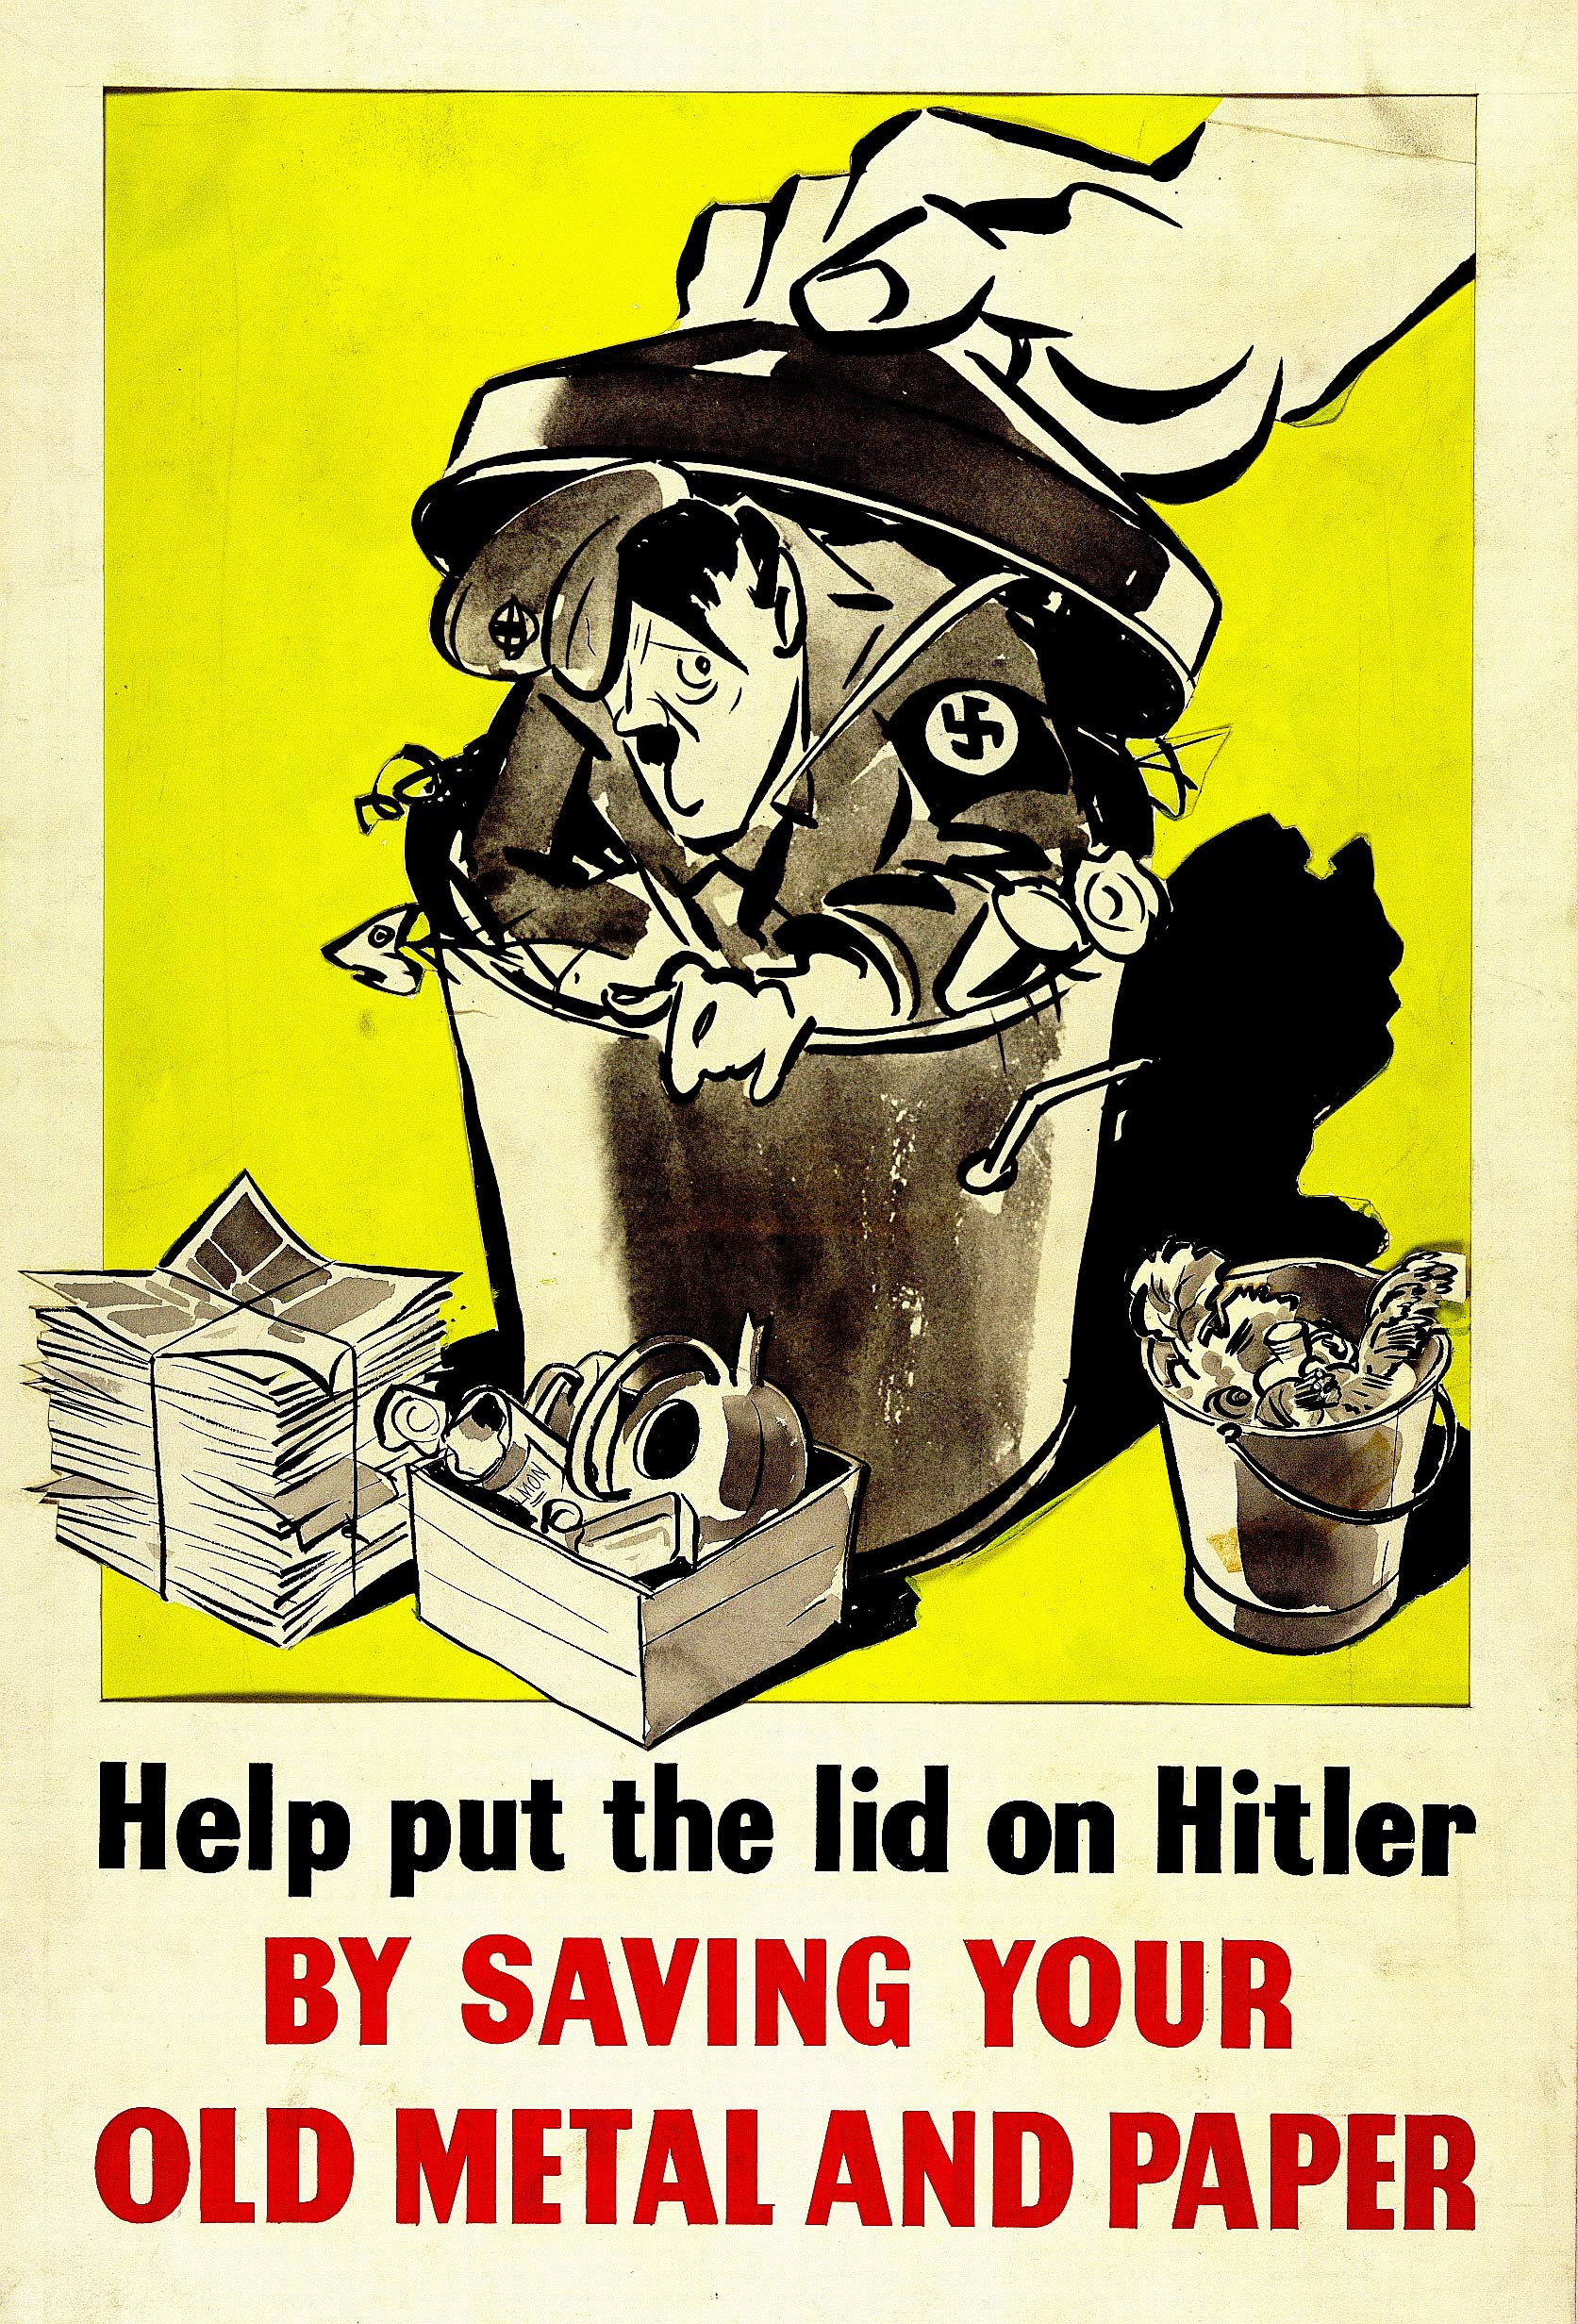 Poster with an illustration of Hitler sitting in a garbage bin and a large hand reaching down and closing the lid over him.